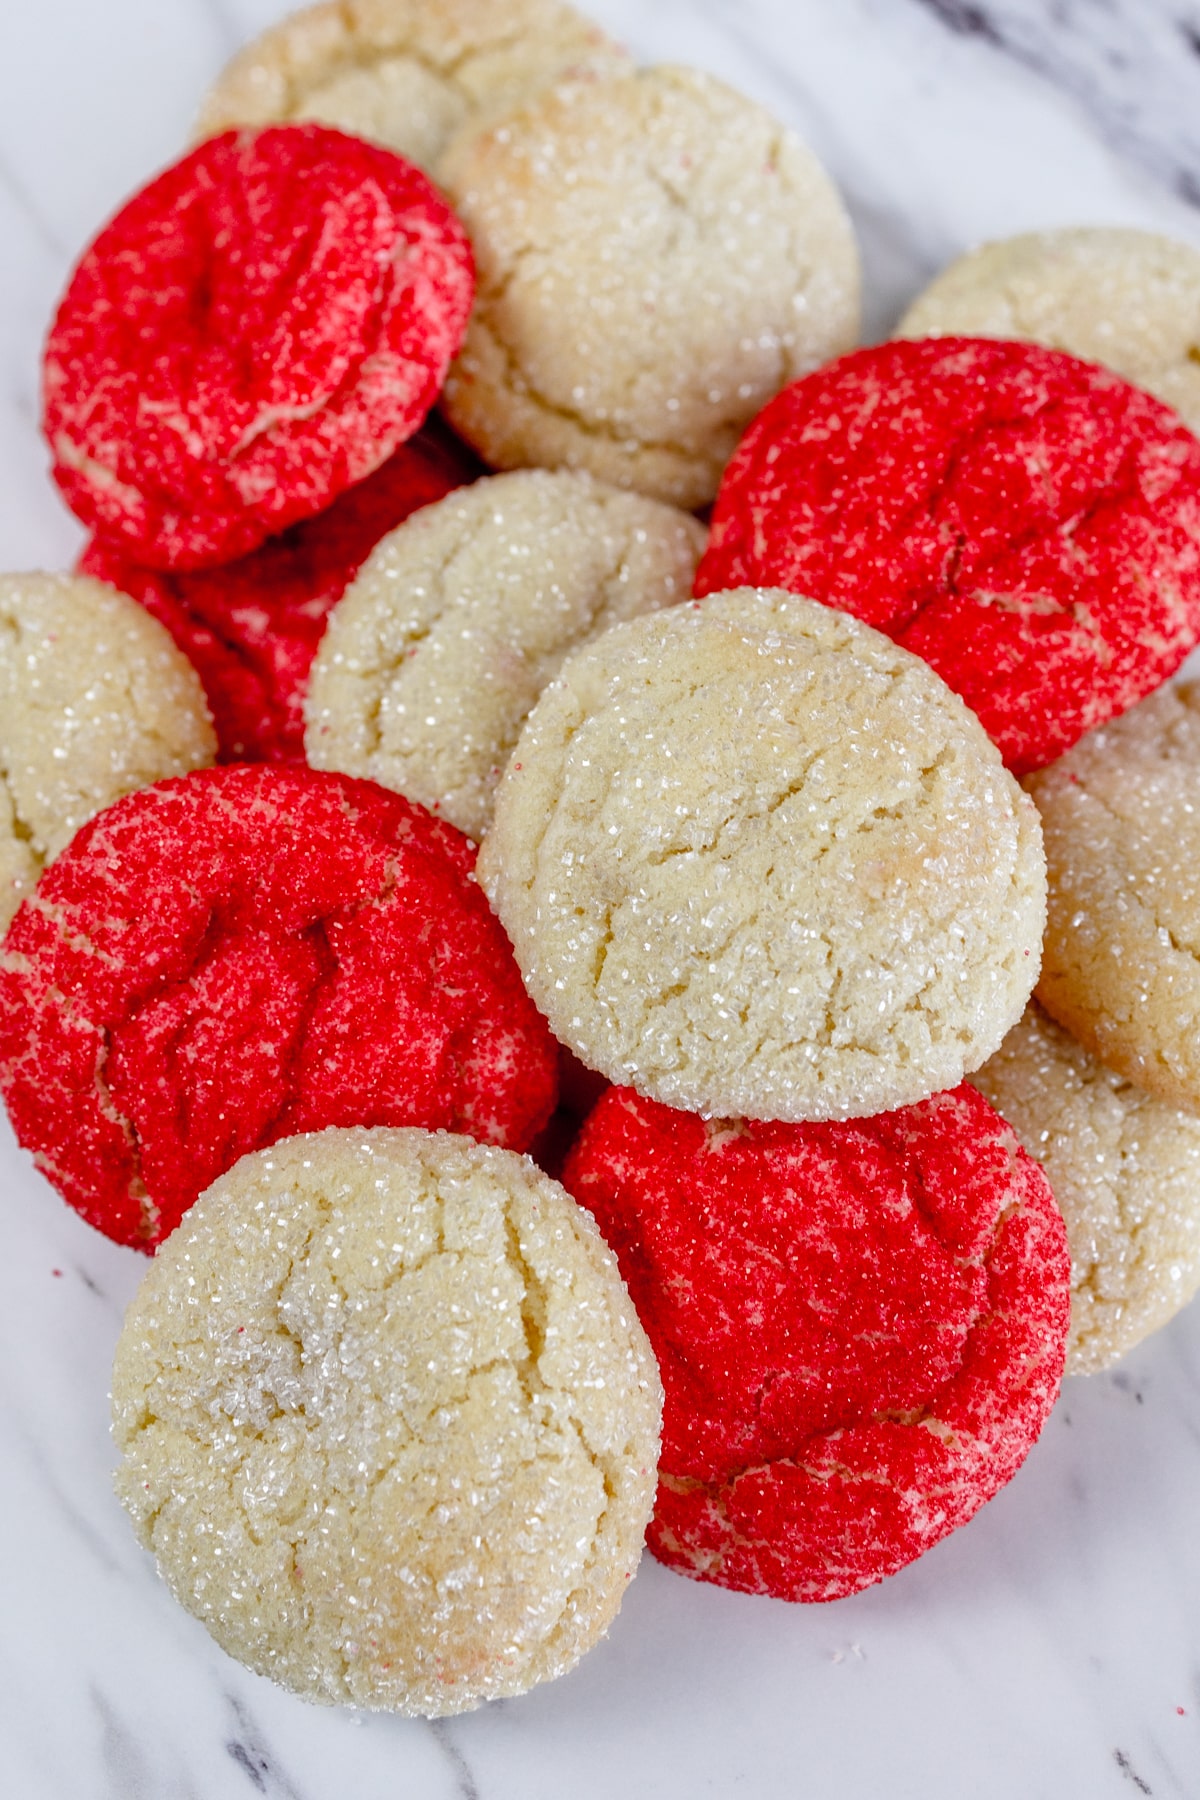 Close up of a pile of red and plain colored sugar cookies.